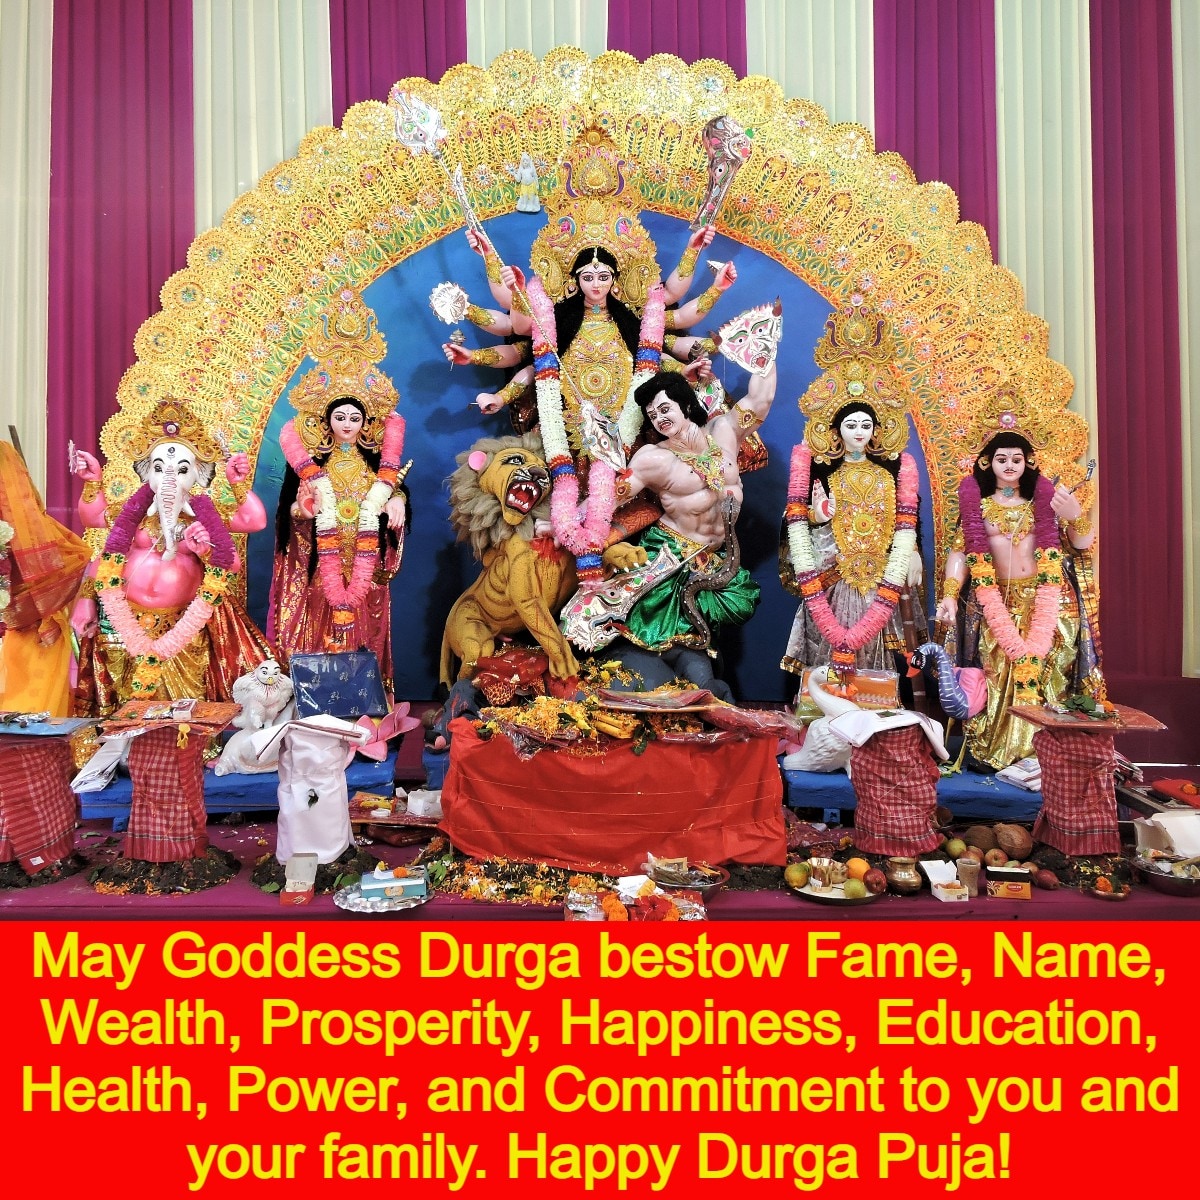 Happy Durga Puja 2022: Best Wishes, messages, quotes, greetings, SMS, WhatsApp and Facebook status to share with your family and friends. (Image: Shutterstock)